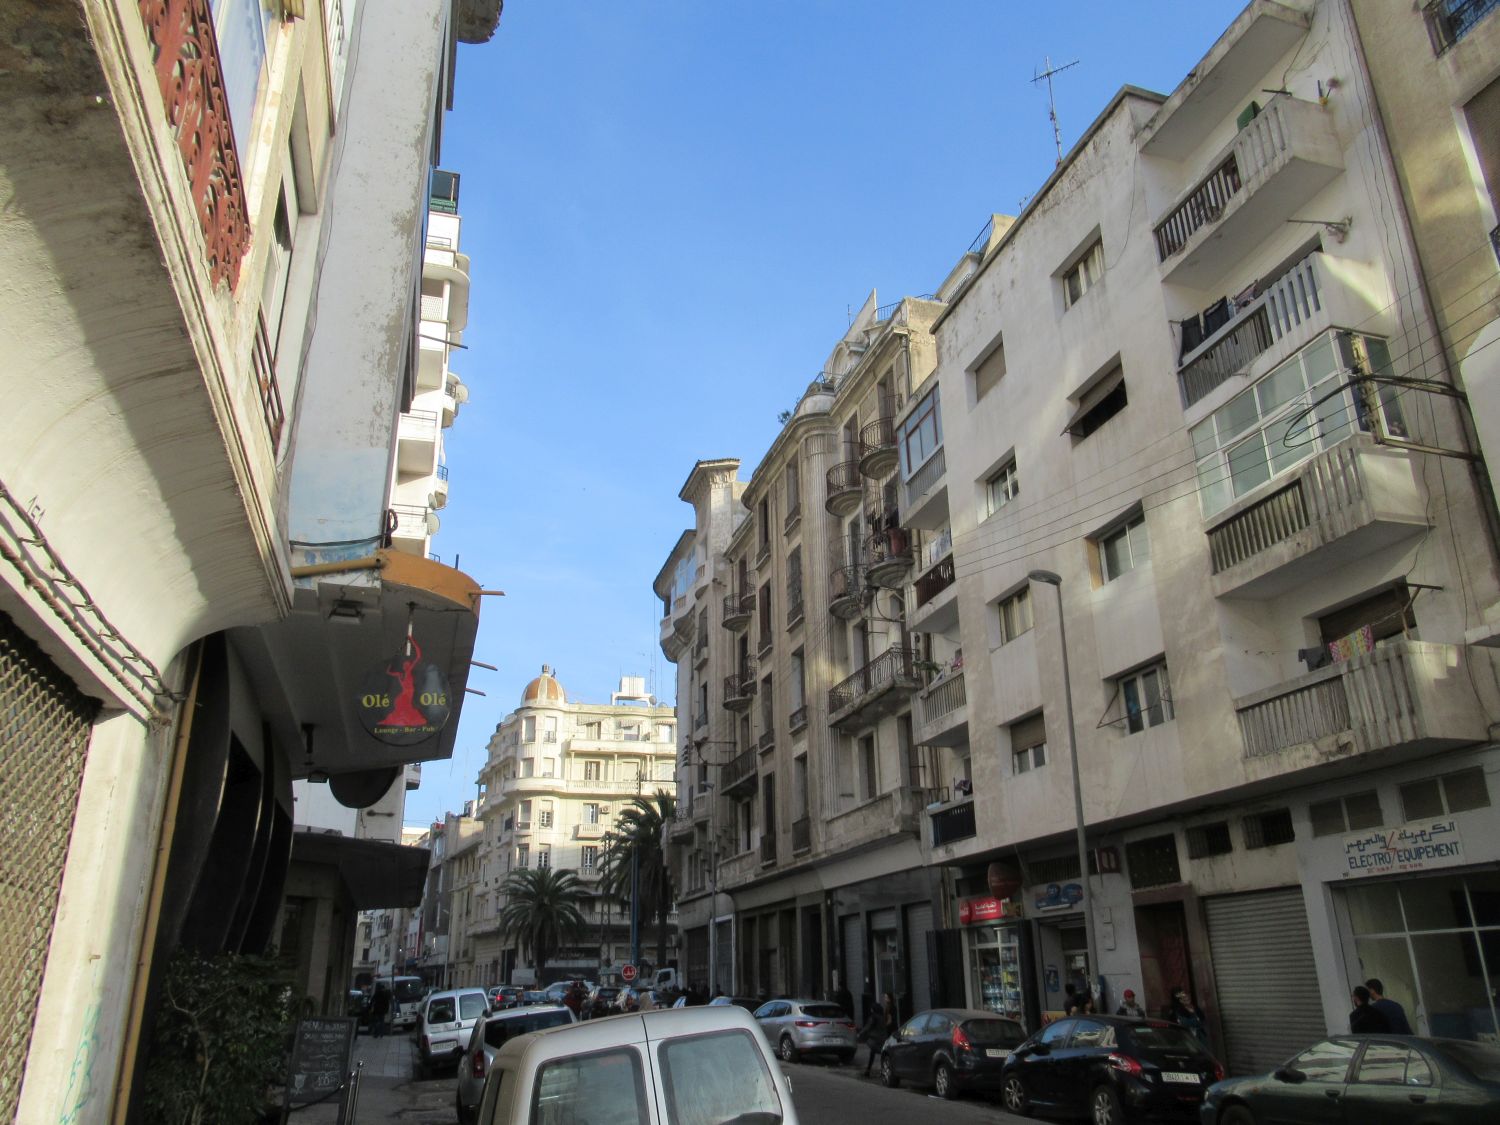 General view of a street.